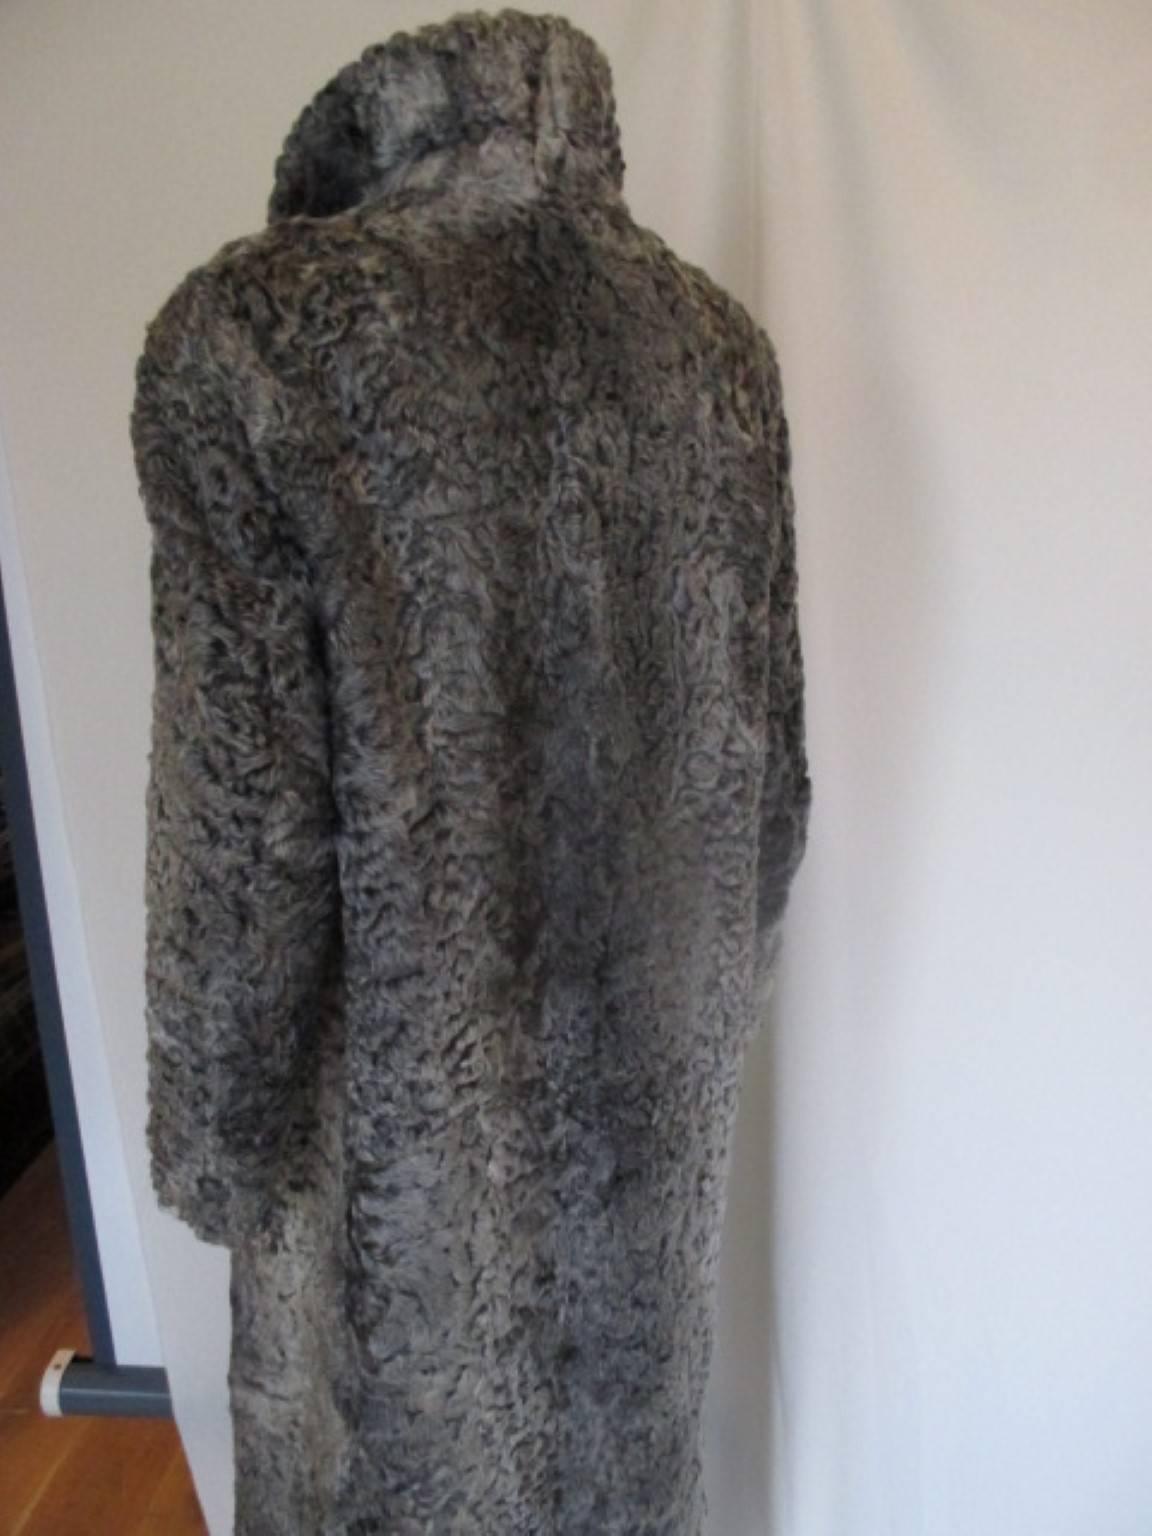 This coat has 2 pockets, 1 hook at the collar, 3 closing hooks with 6 decorative buttons.
The fur is soft and in good vintage condition
The size is aproxx.  eu 38/40, us 8/10 medium, see section measurements.

Please note that vintage items are not